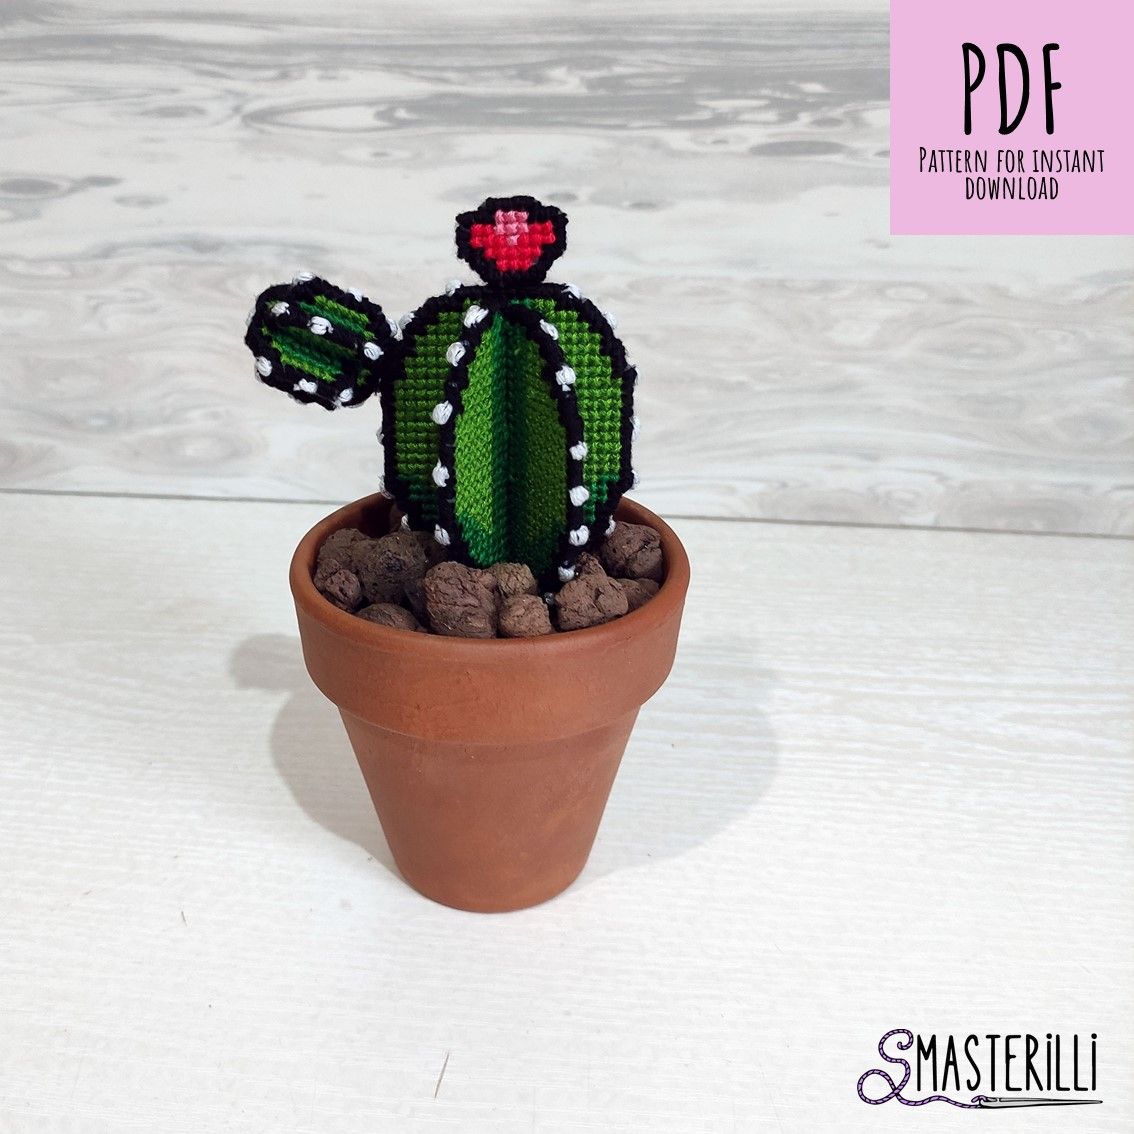 Cross stitch pattern of a potted cactus for plastic canvas